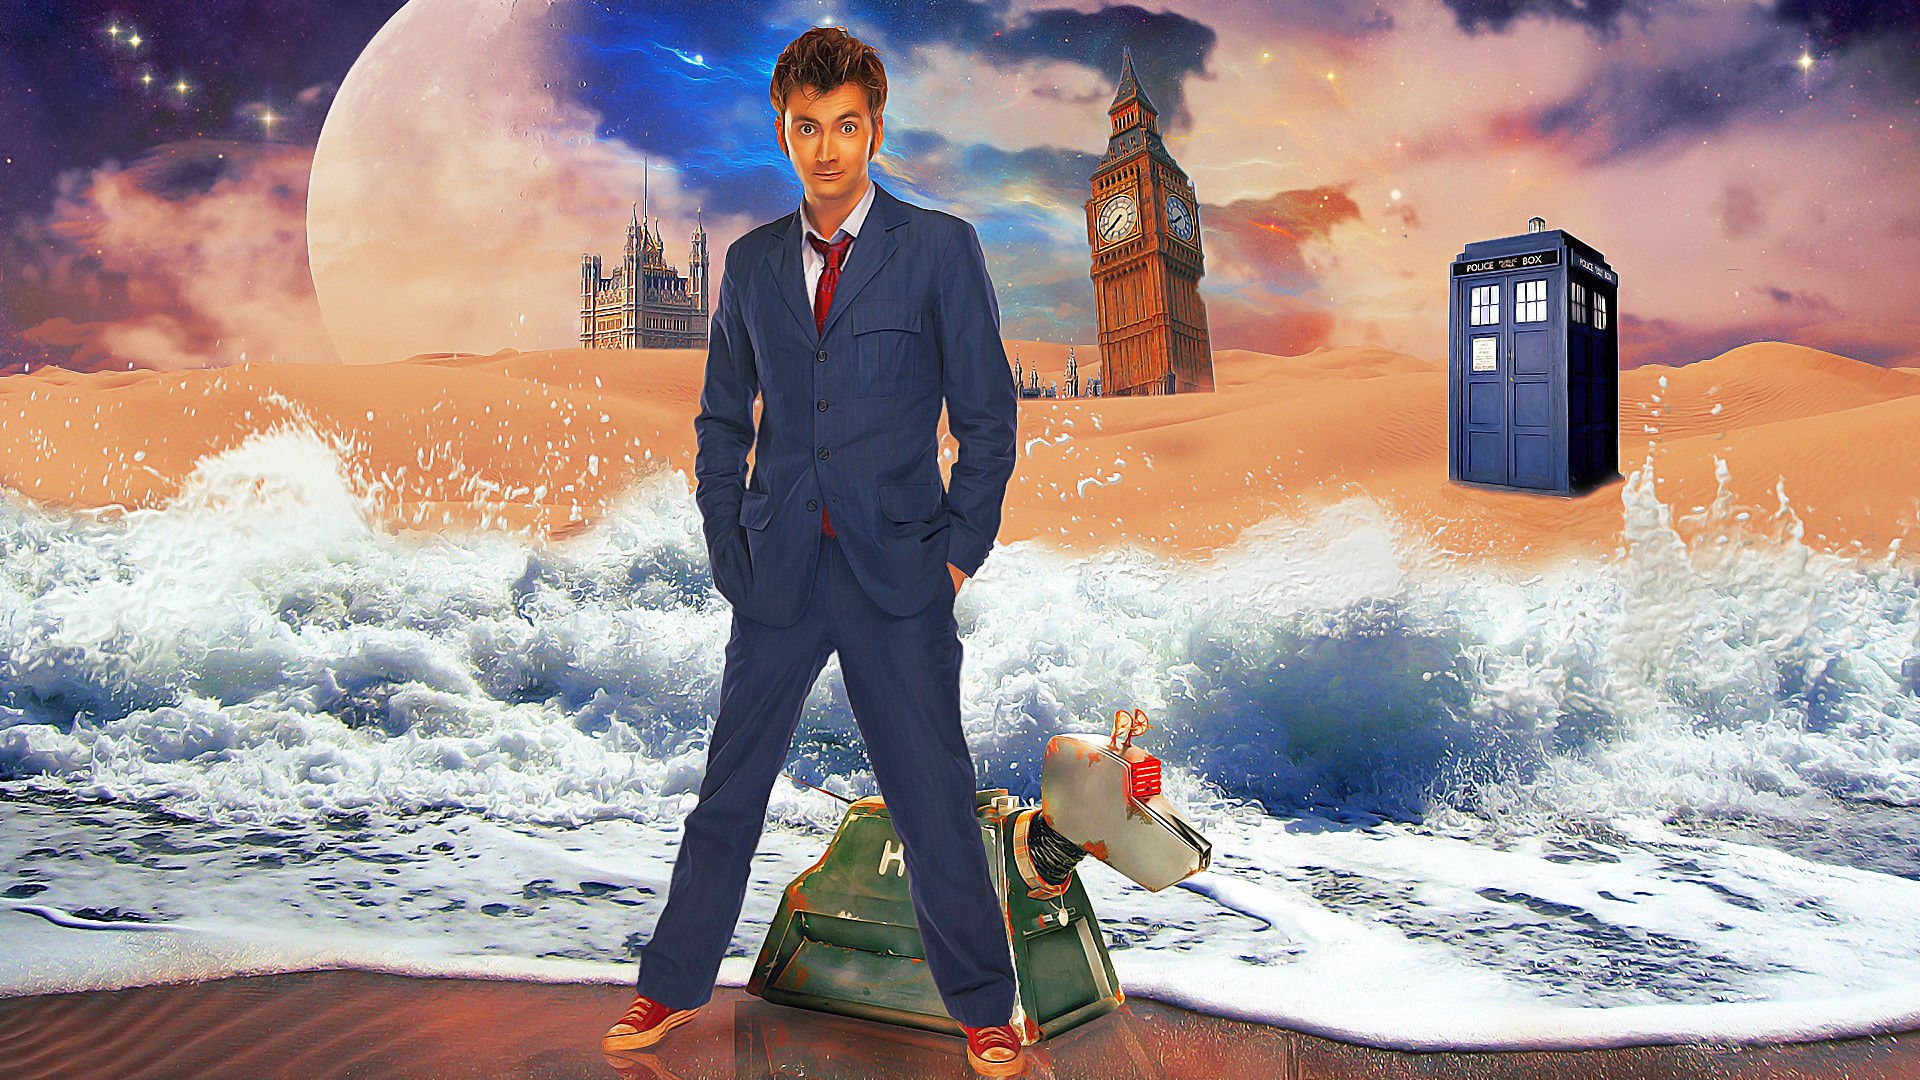 General 1920x1080 Doctor Who The Doctor TARDIS David Tennant Tenth Doctor TV series Science Fiction Men suits tie looking at viewer digital art science fiction water waves men standing phone box